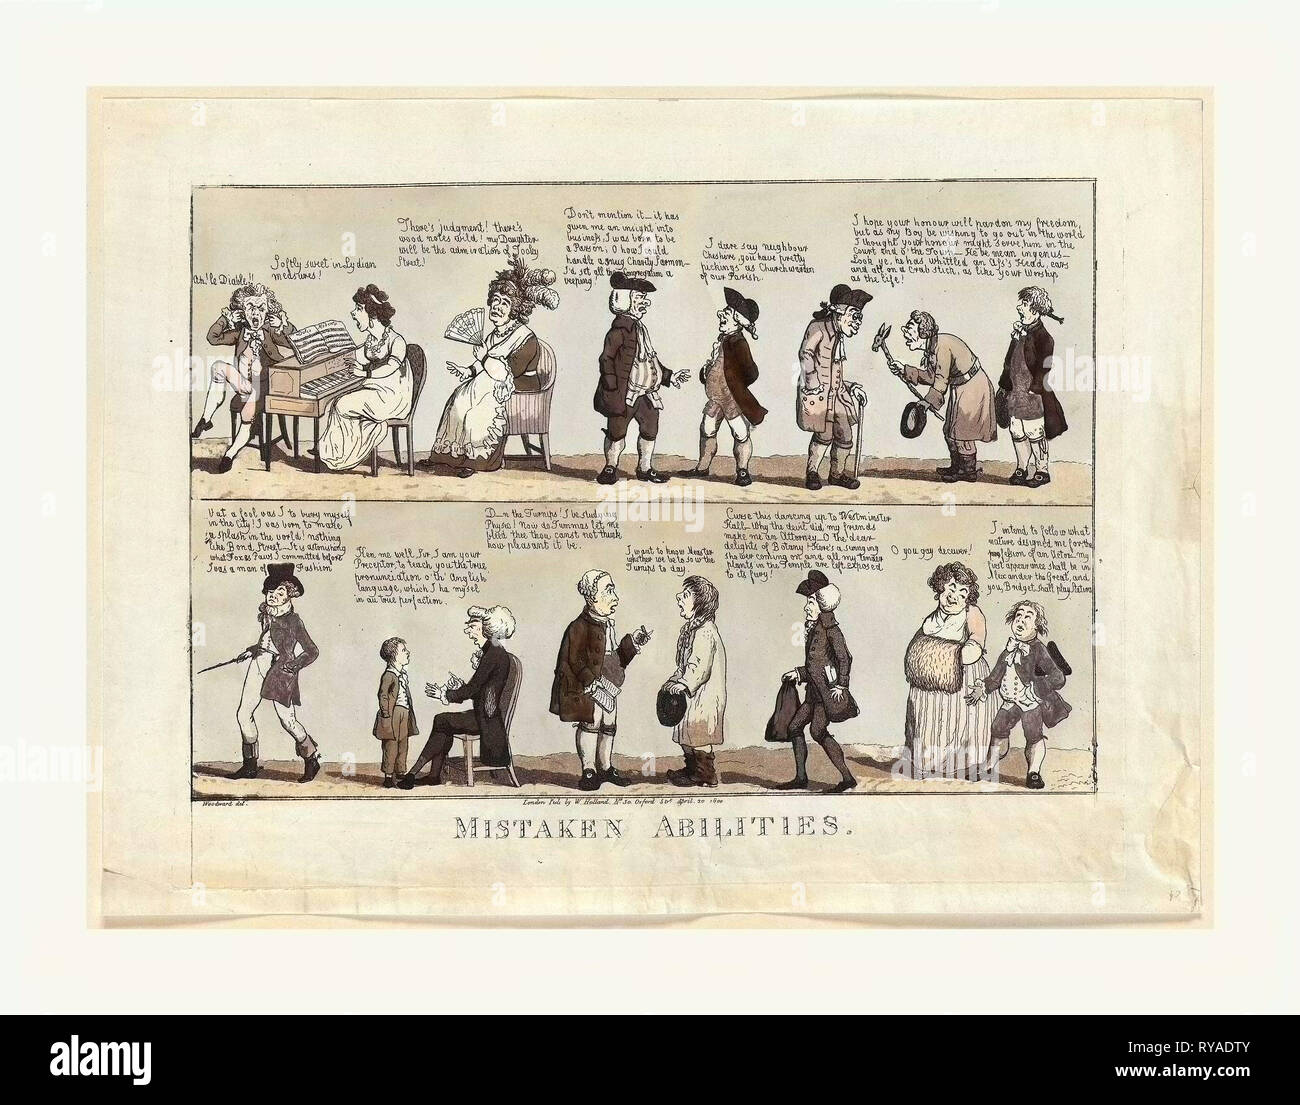 Mistaken Abilities, Engraving 1800, Several Individuals, Each Believing They Are Better Suited to a Particular Occupation Other Than the One They Are Currently Engaged in, Such As a Farmer that Wants to Be a Doctor or an Attorney that Would Rather Be Studying Botany Stock Photo